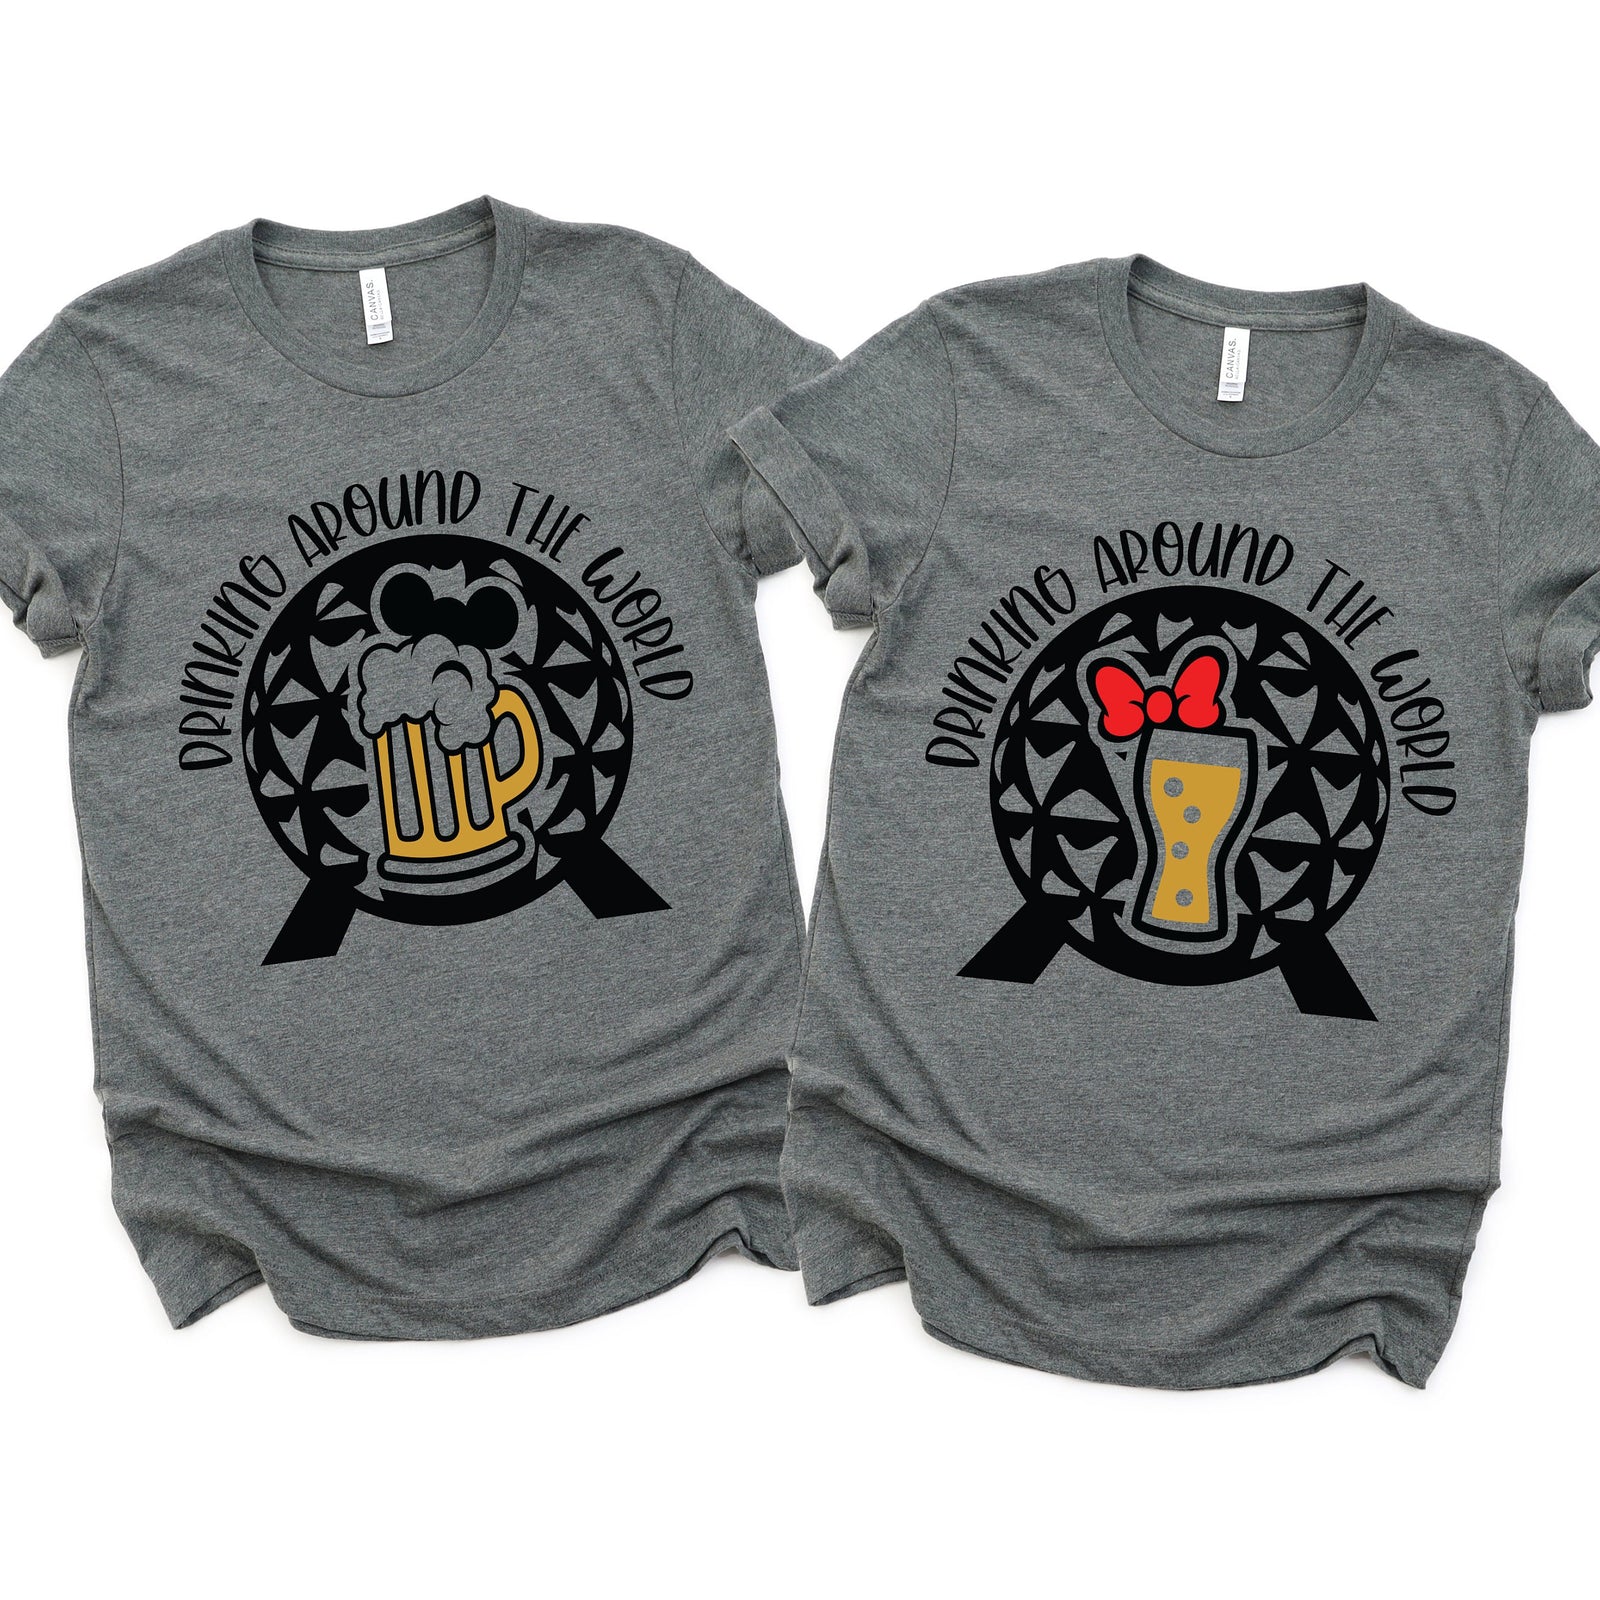 Drinking Around the World Matching Disney Shirts - Disney Couples Shirt - Epcot Food and Wine Festival - Drinking T Shirts